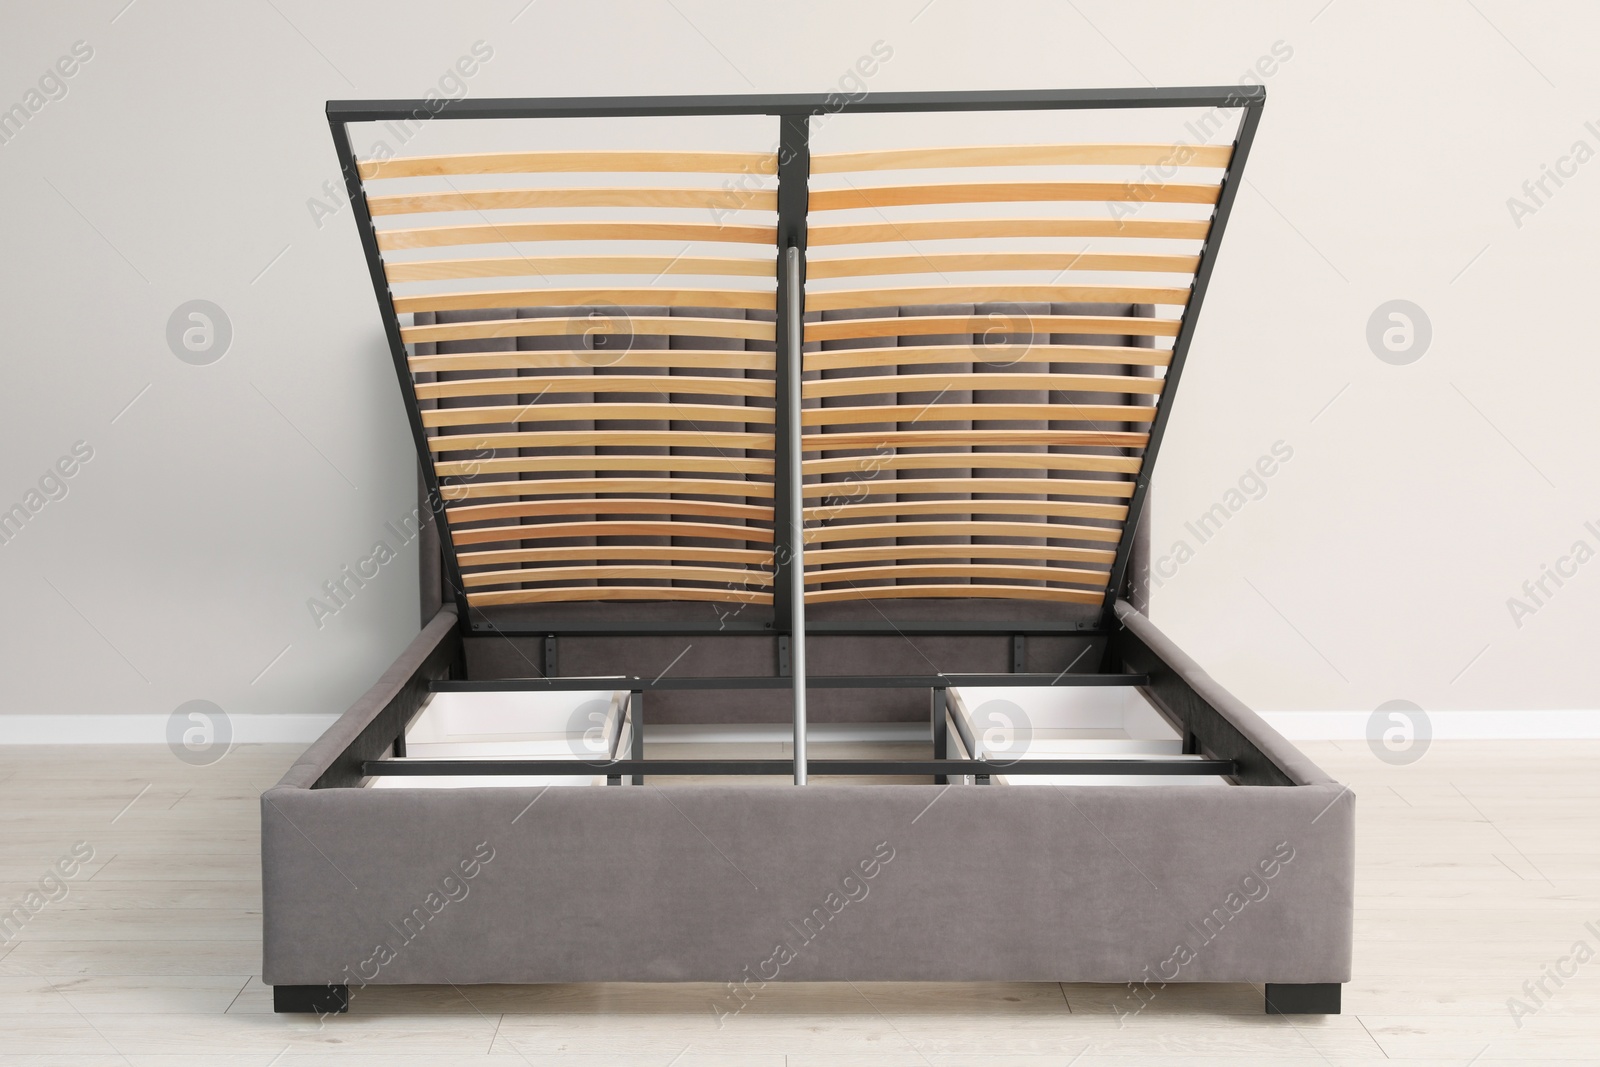 Photo of Comfortable bed with storage space for bedding under lifted slatted base in room